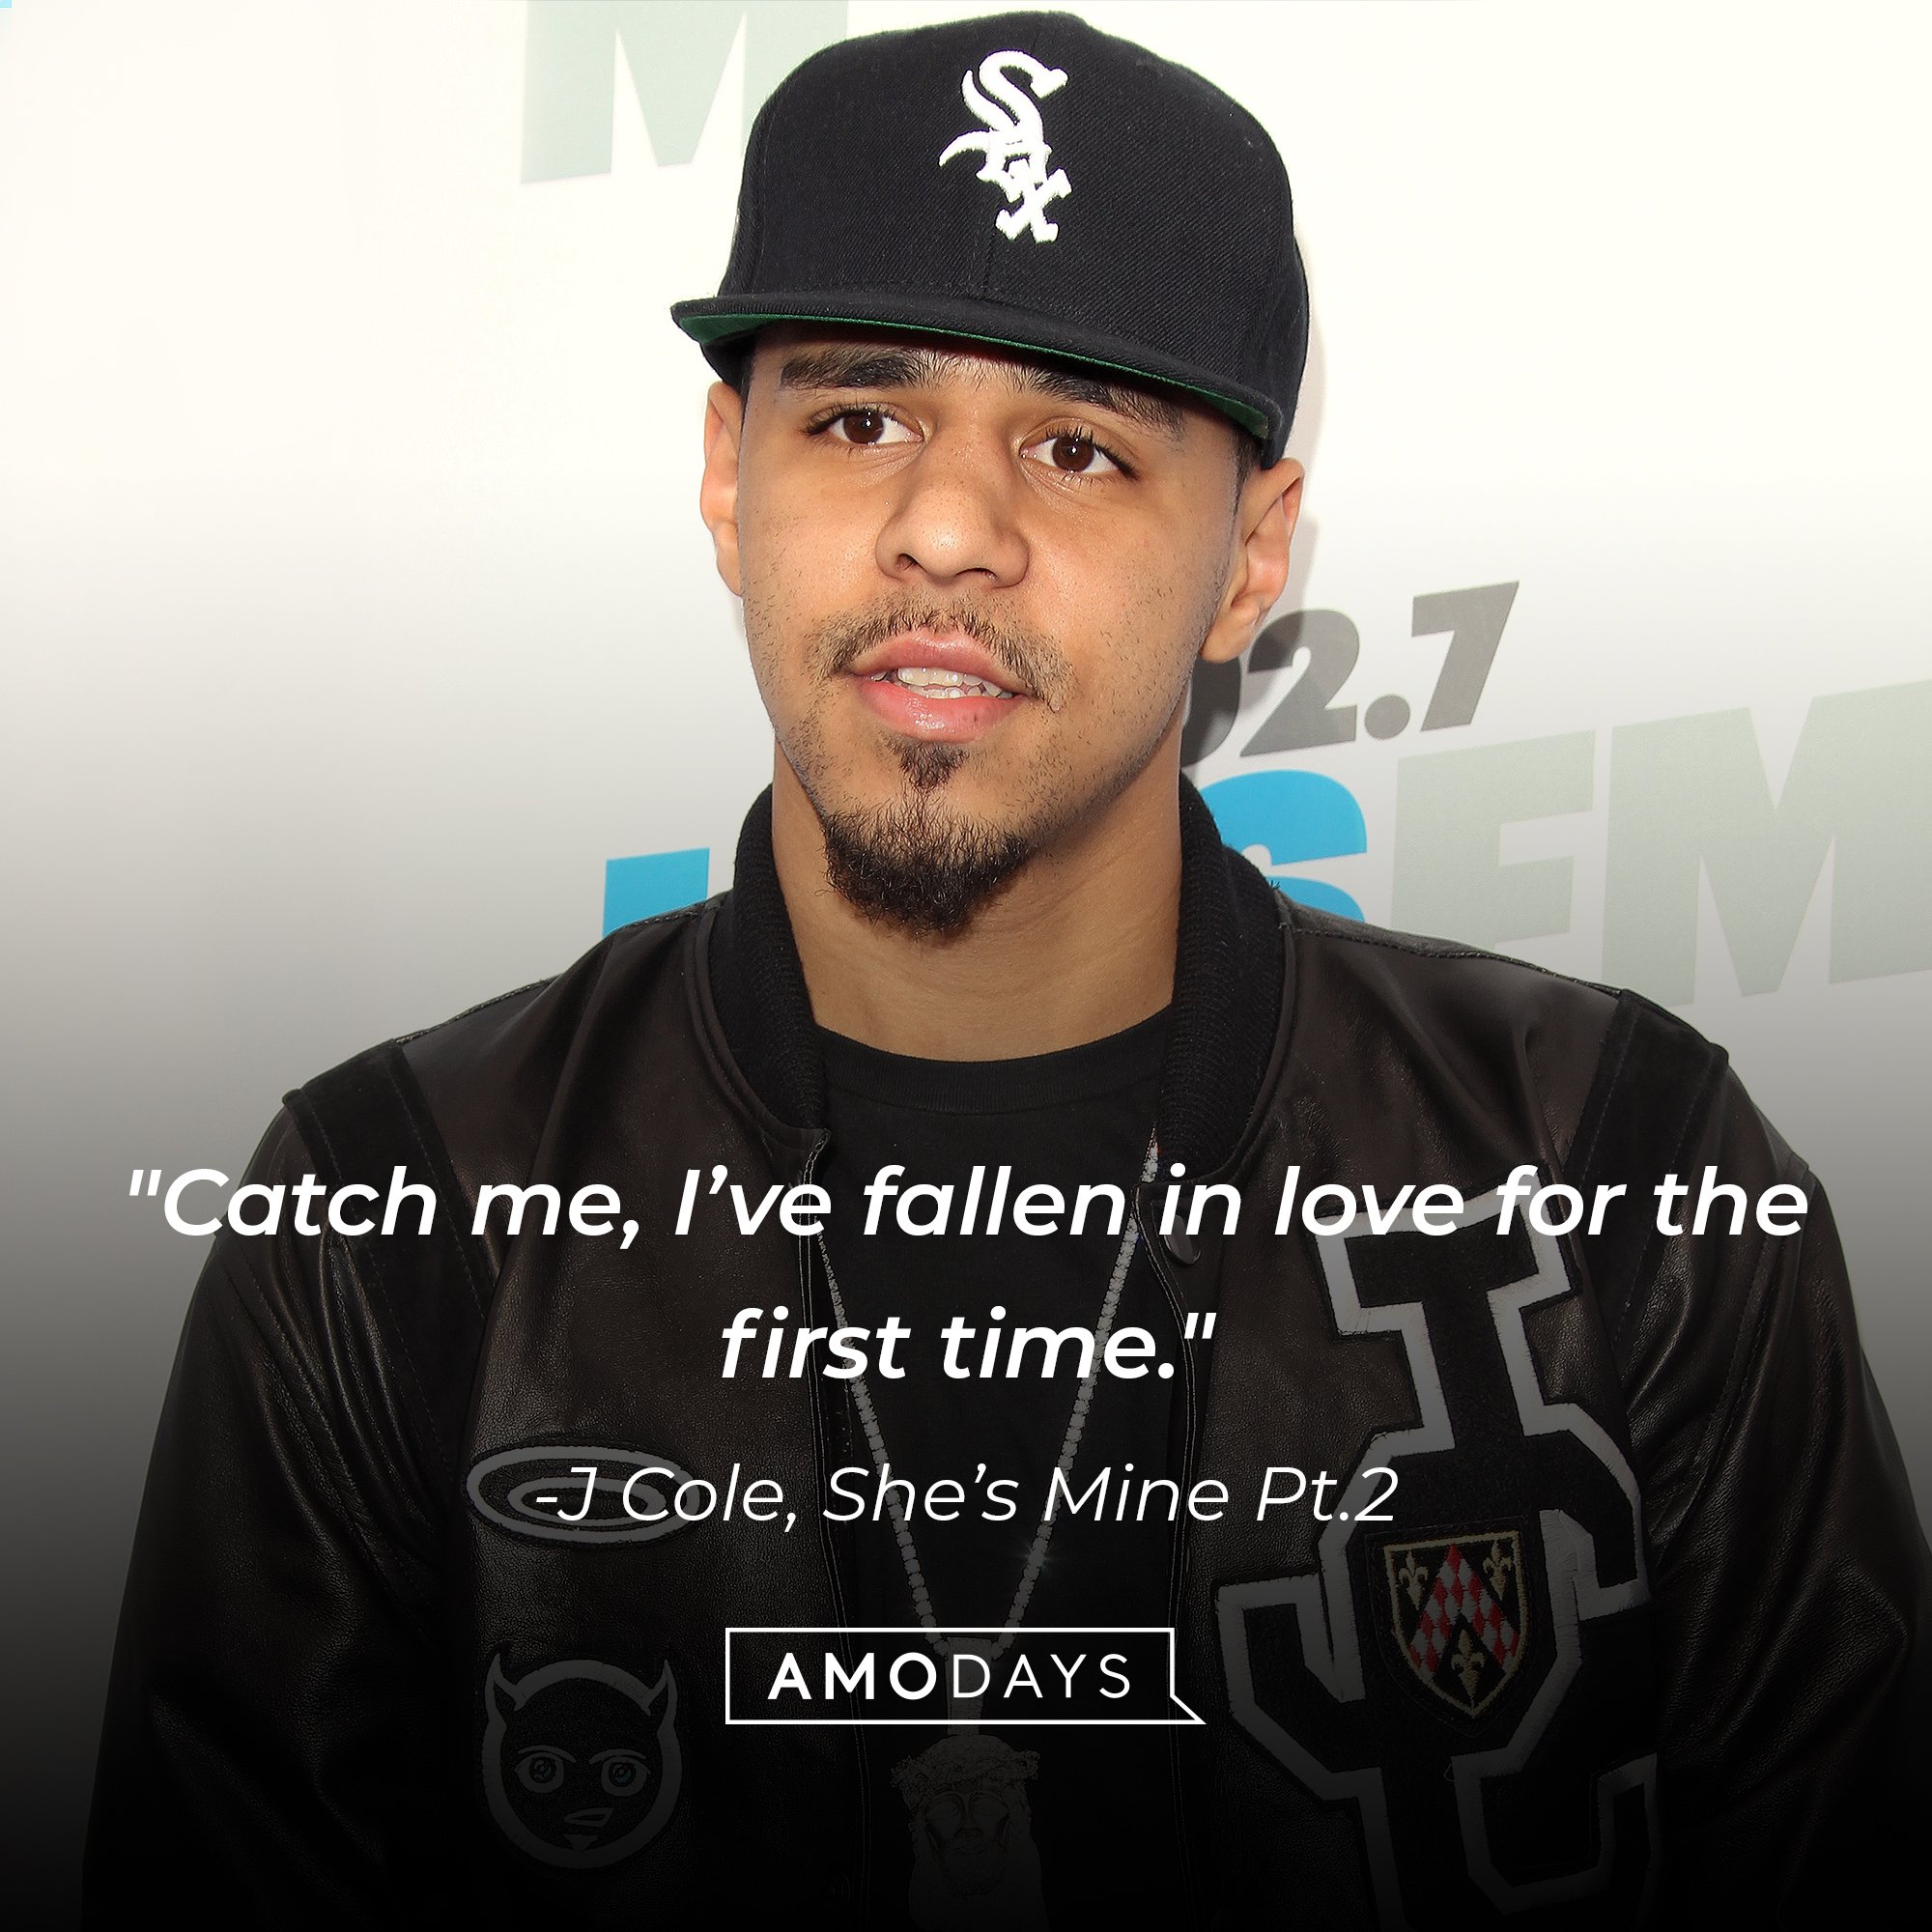 J Cole's quote: "Catch me, I’ve fallen in love for the first time." | Image: AmoDays